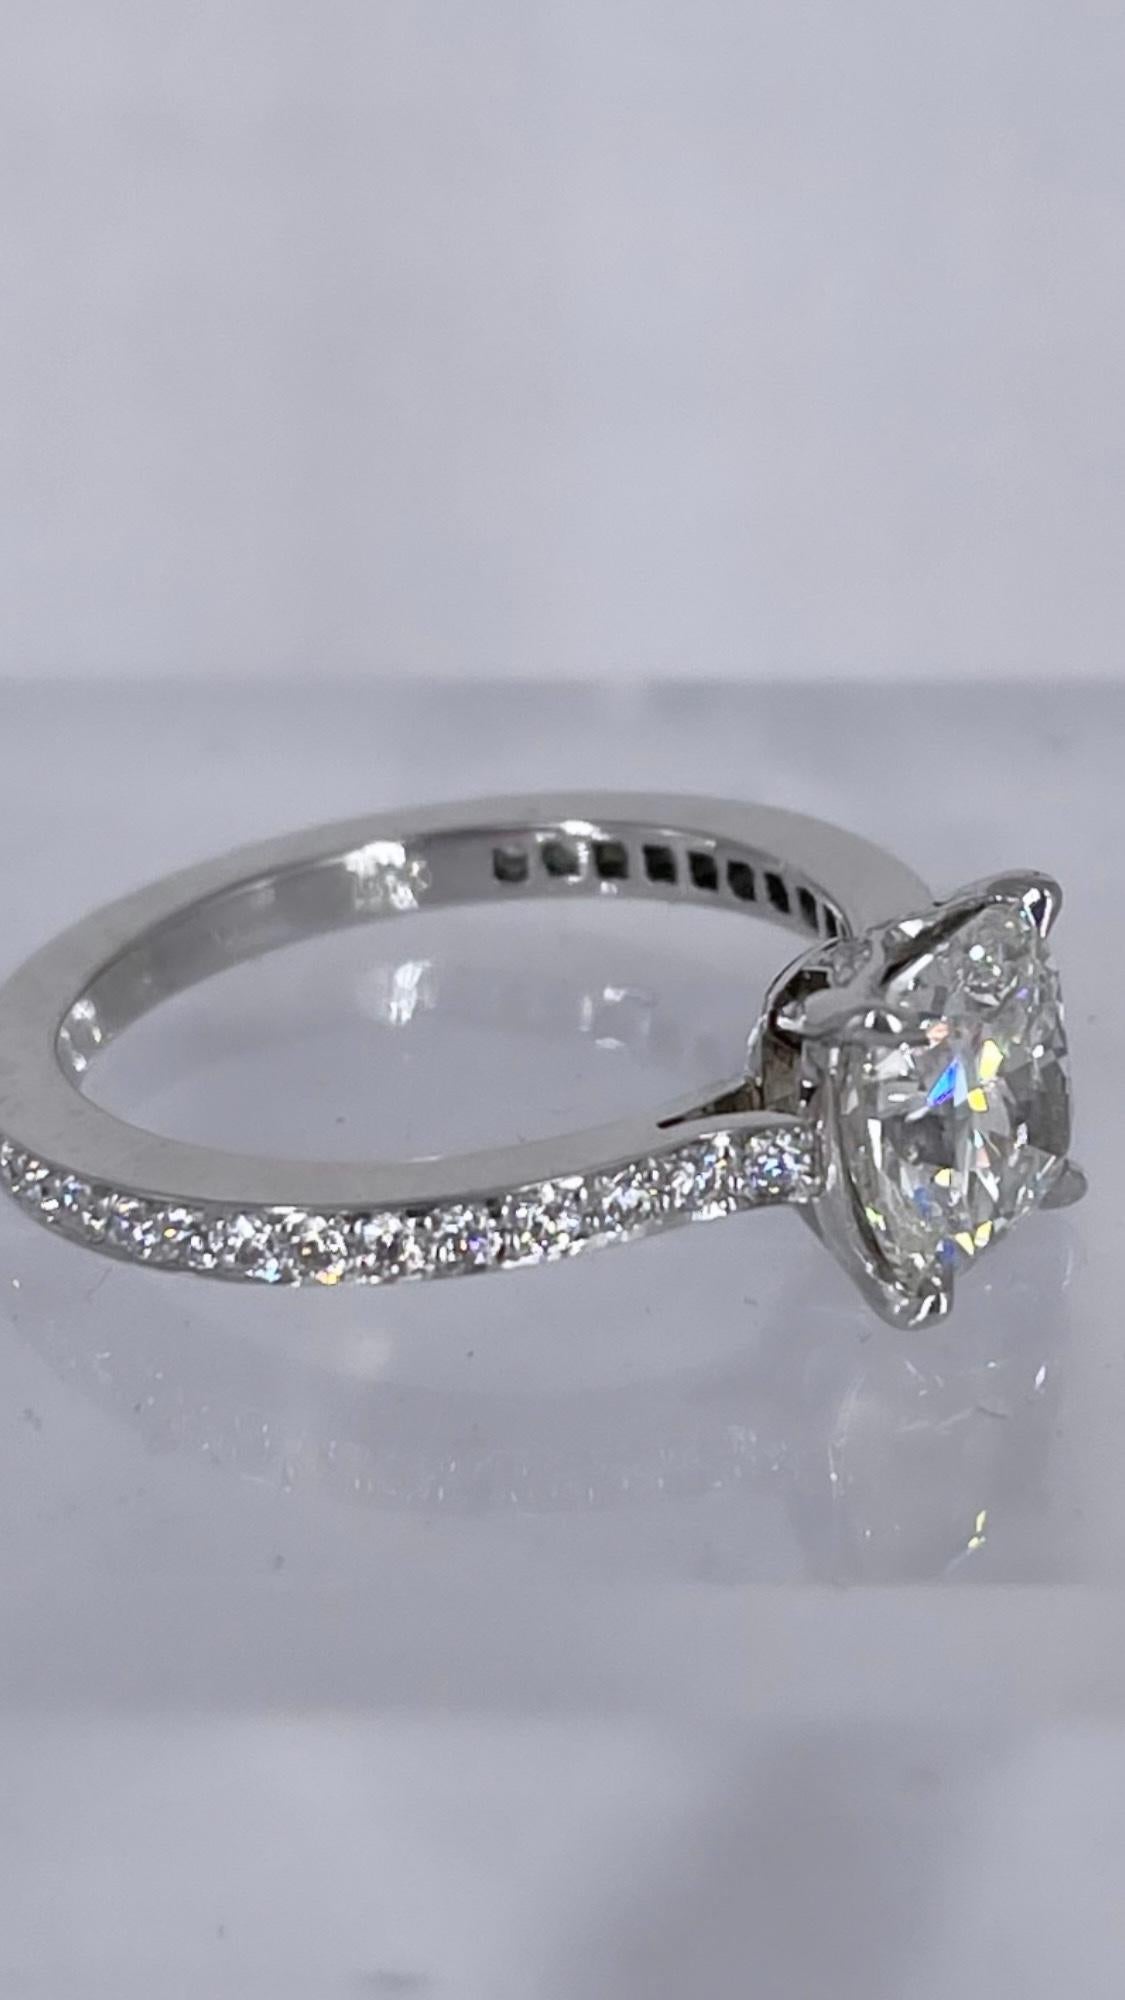 This sparkling engagement ring by J. Birnbach features a gorgeous 1.50 carat cushion cut diamond. It is GIA certified G color and SI1 clarity. This diamond has a beautiful square shape, with the signature brilliance and soft rounded corners of a